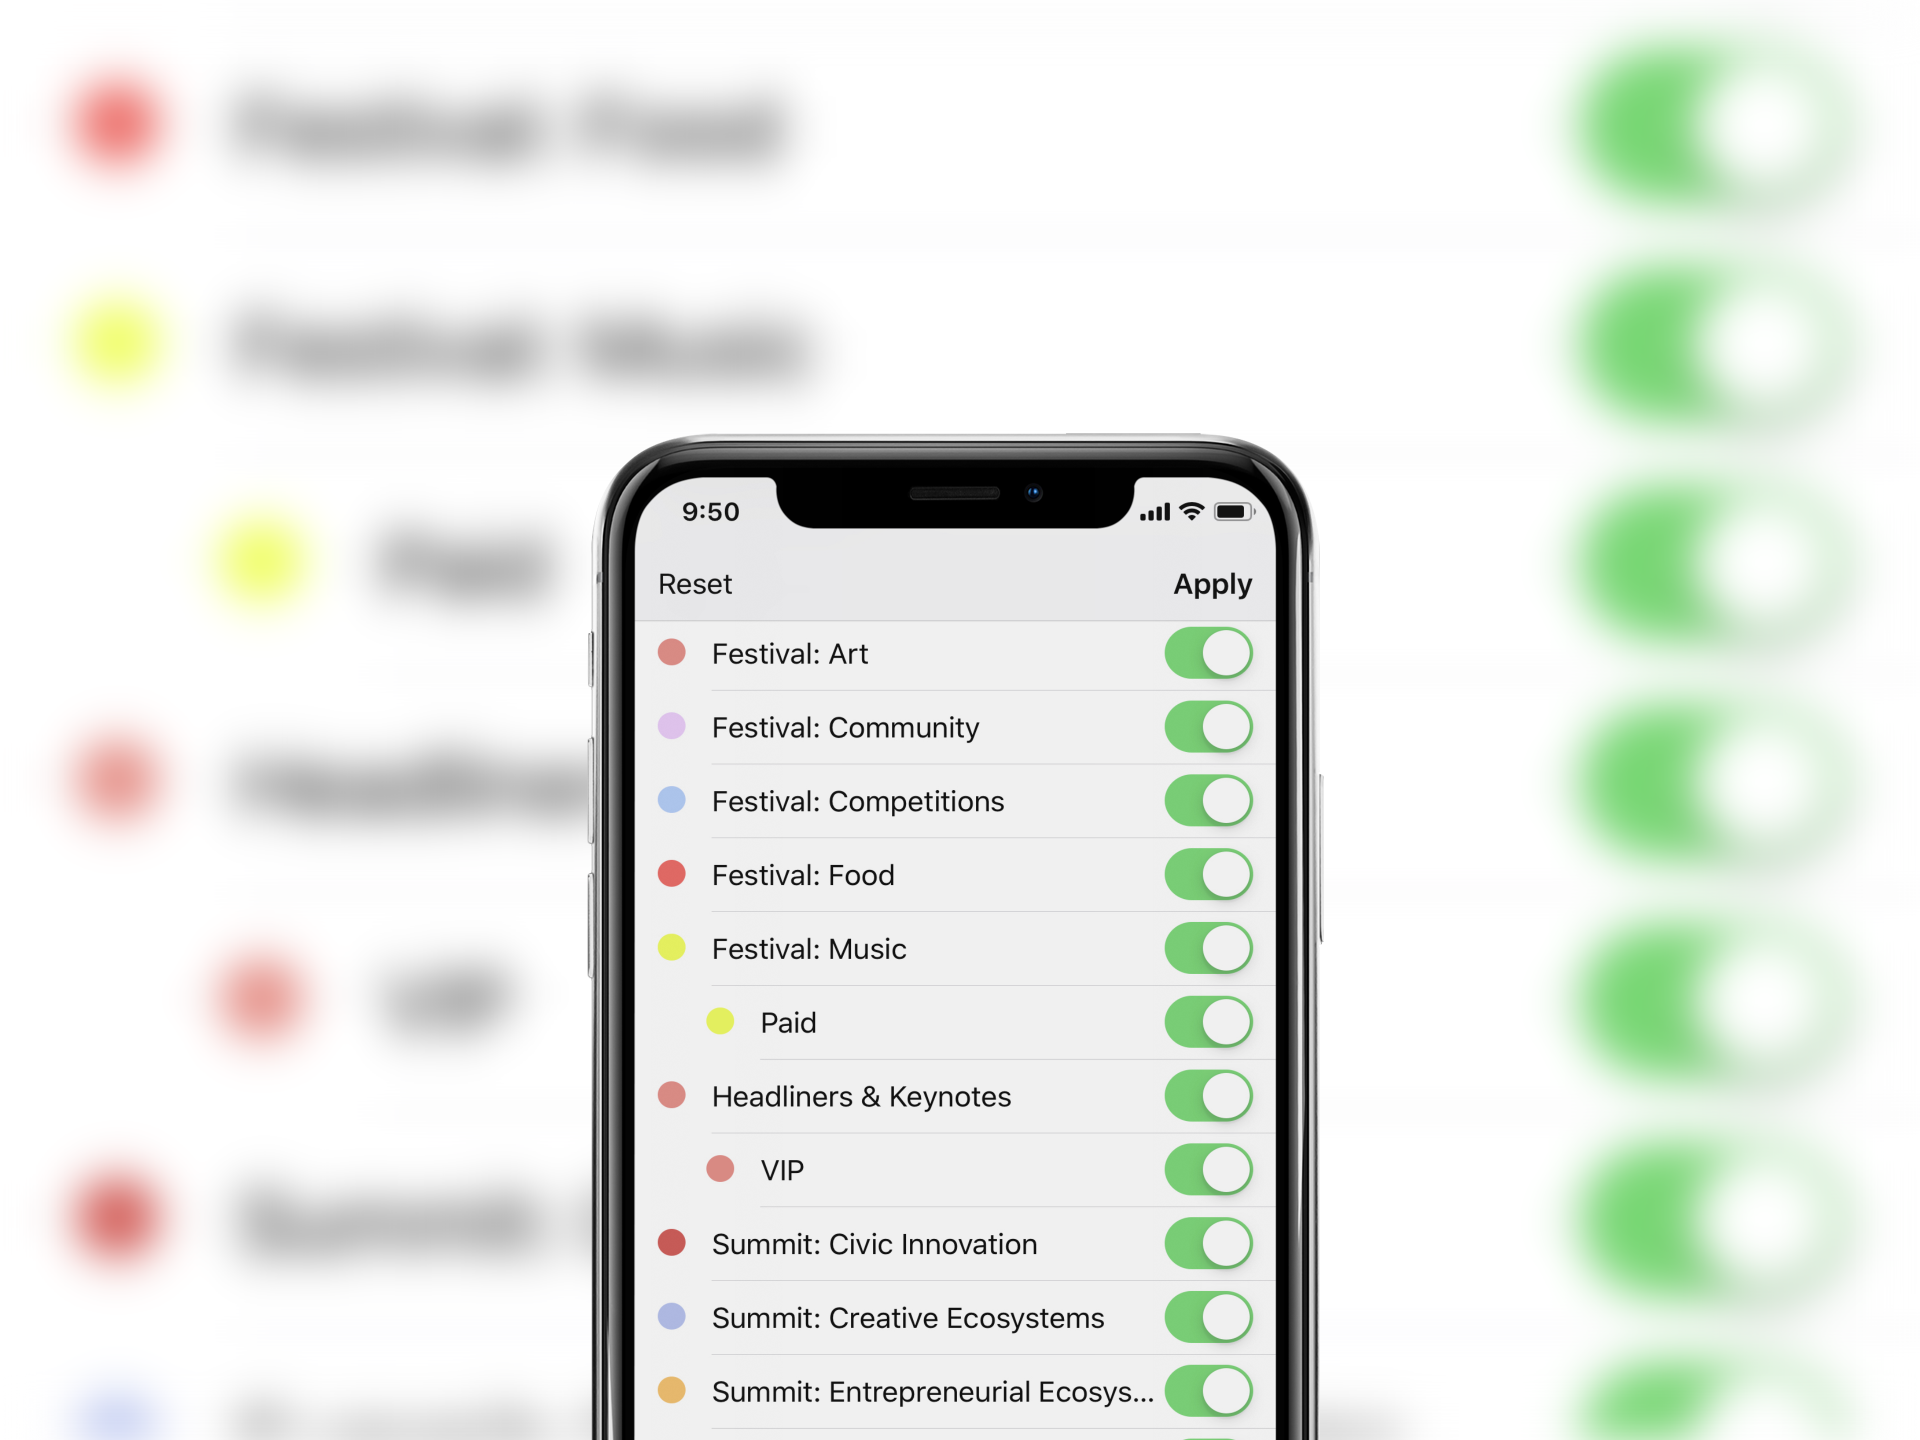 Iphone X Mockup In Portrait Position Against A Blur Background 25030 1